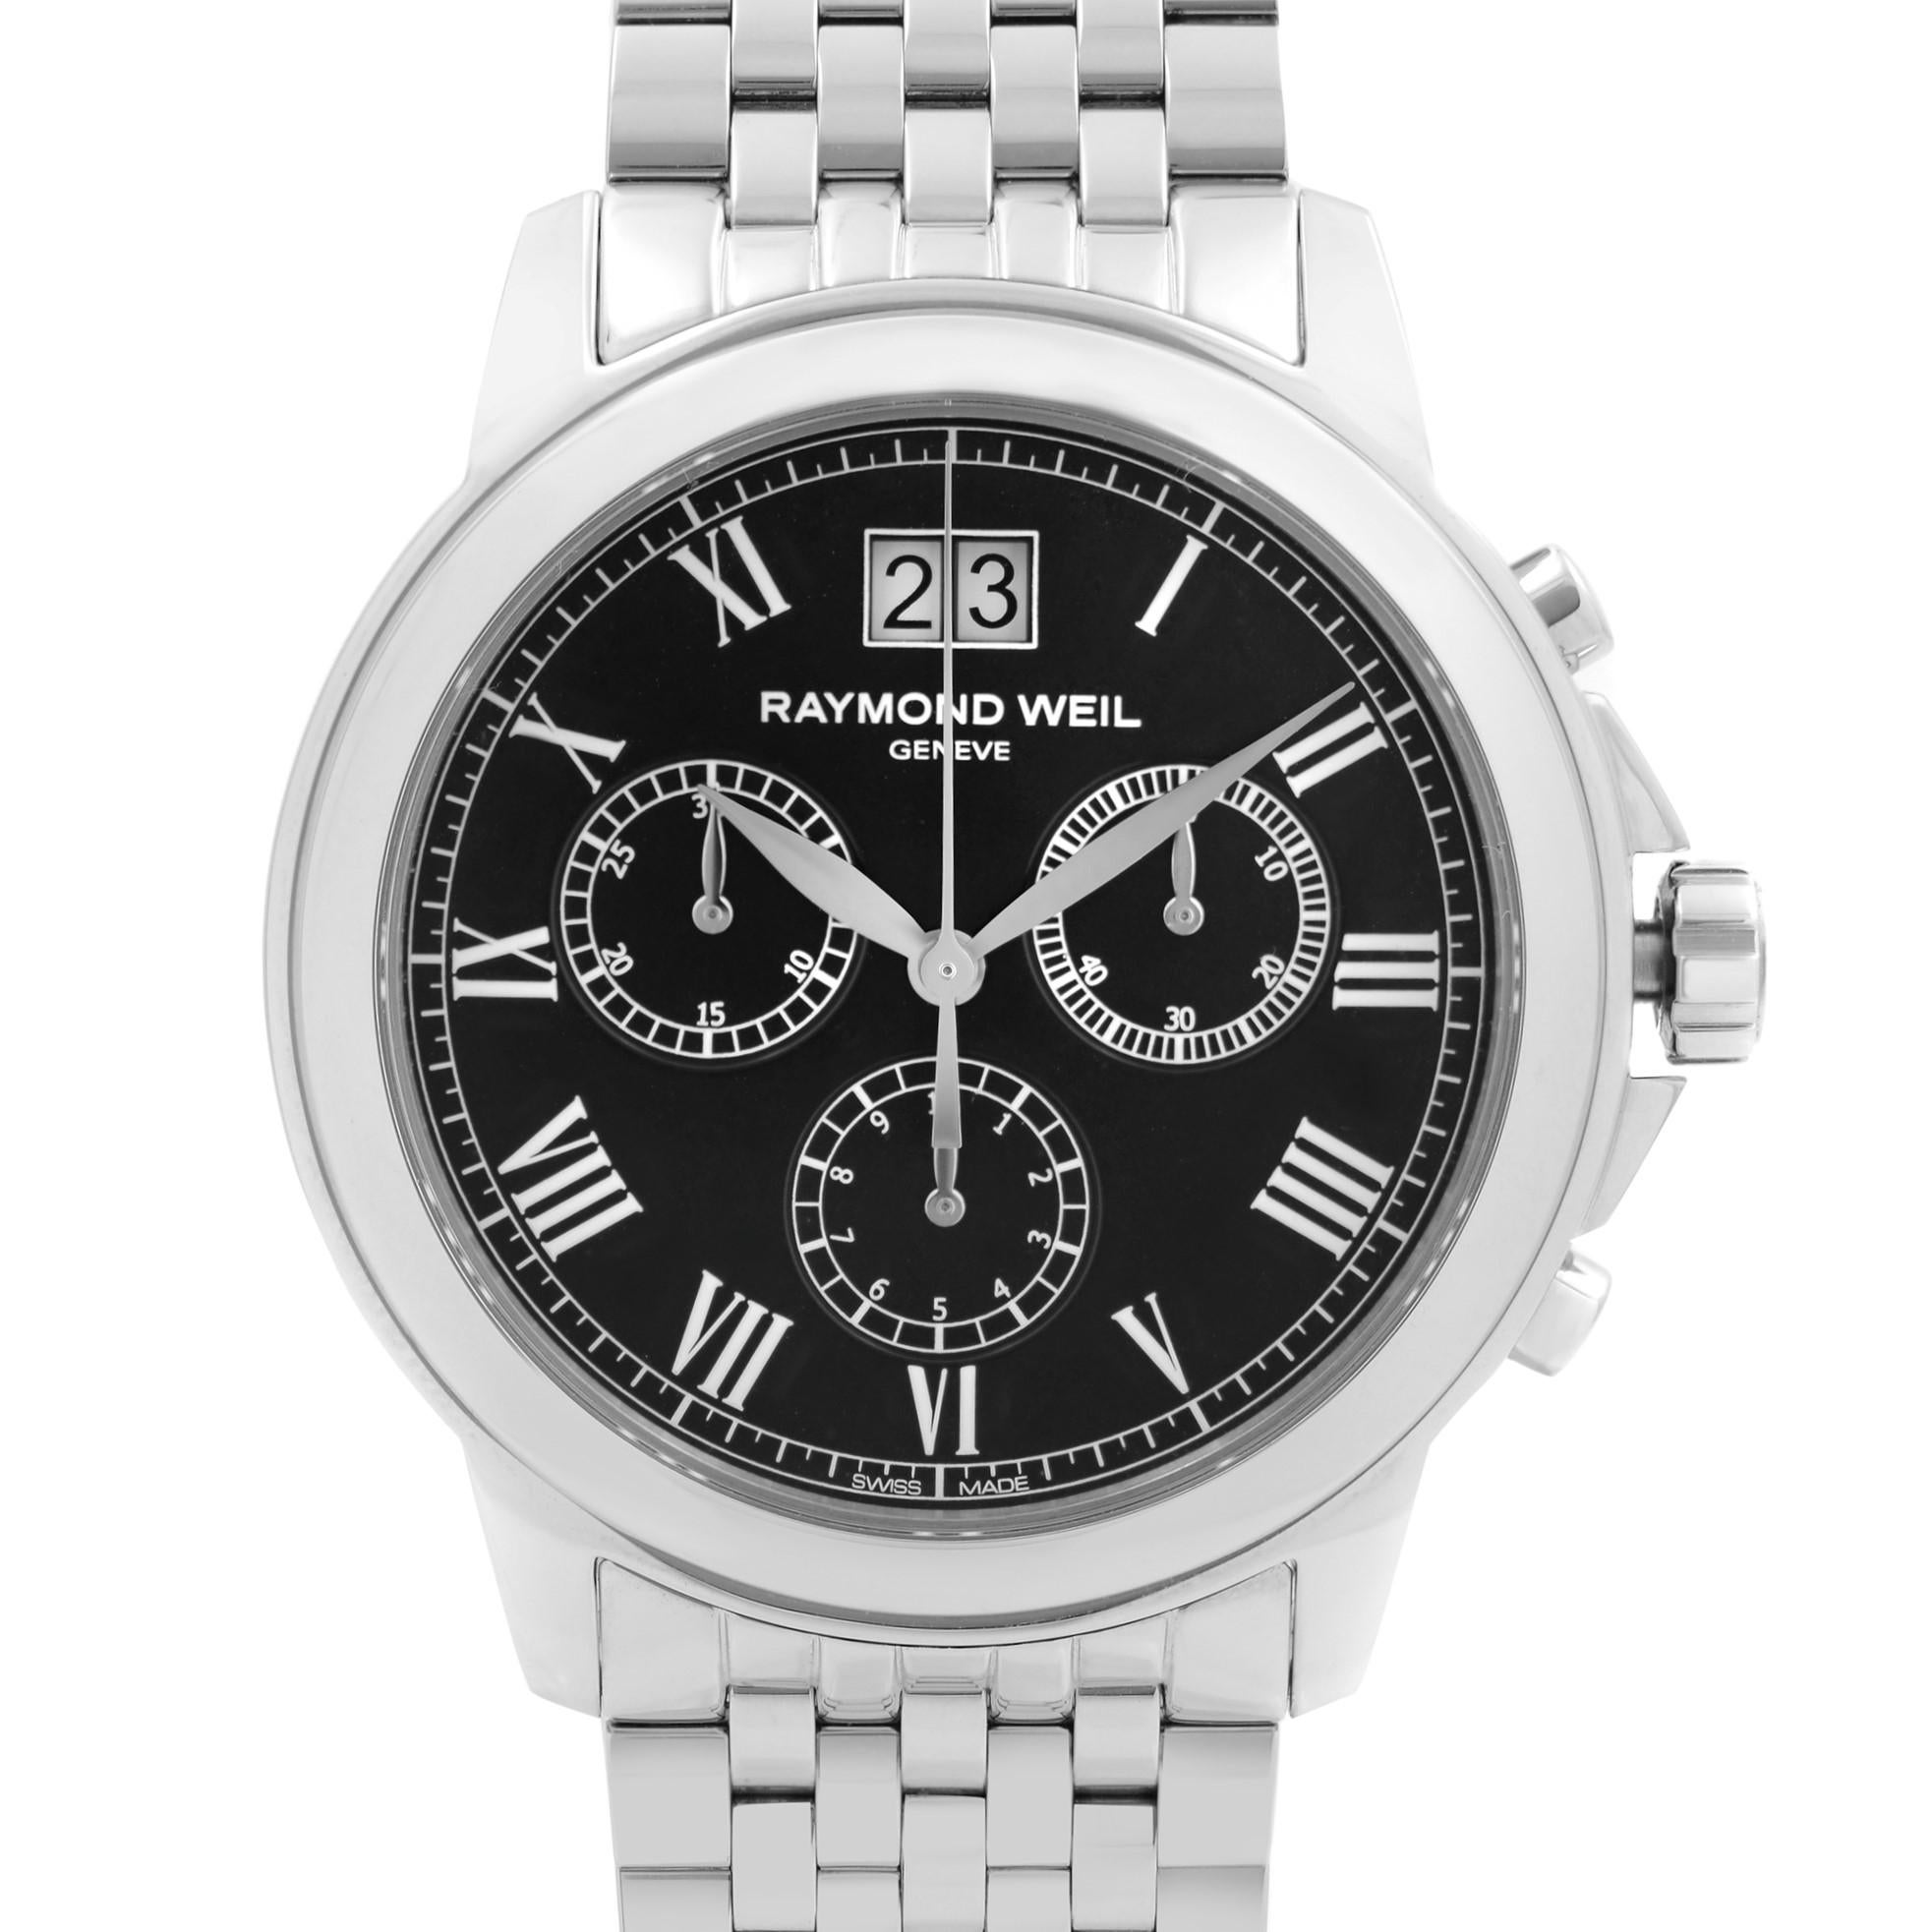 Display Model Raymond Weil Tradition 39mm Steel Black Dial Quartz Men's Watch 4476-ST-00200. This Beautiful Timepiece Features: Stainless Steel Case and Bracelet, Fixed Stainless Steel Bezel, Black Dial with Silver-Tone Hands, And Roman Numerals